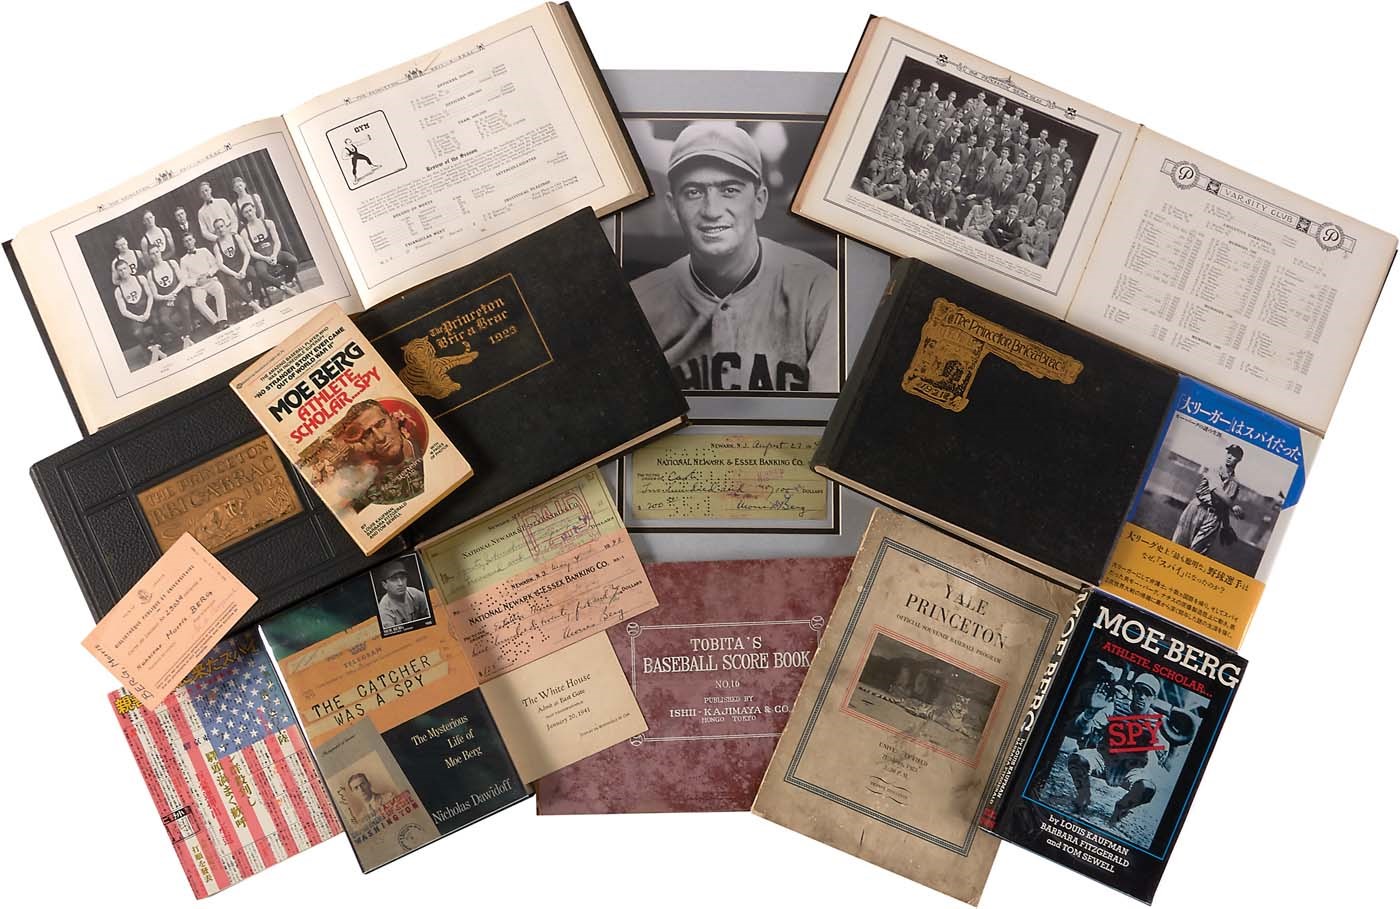 Moe Berg Collection w/Autographs, Princeton Yearbooks & More (14)